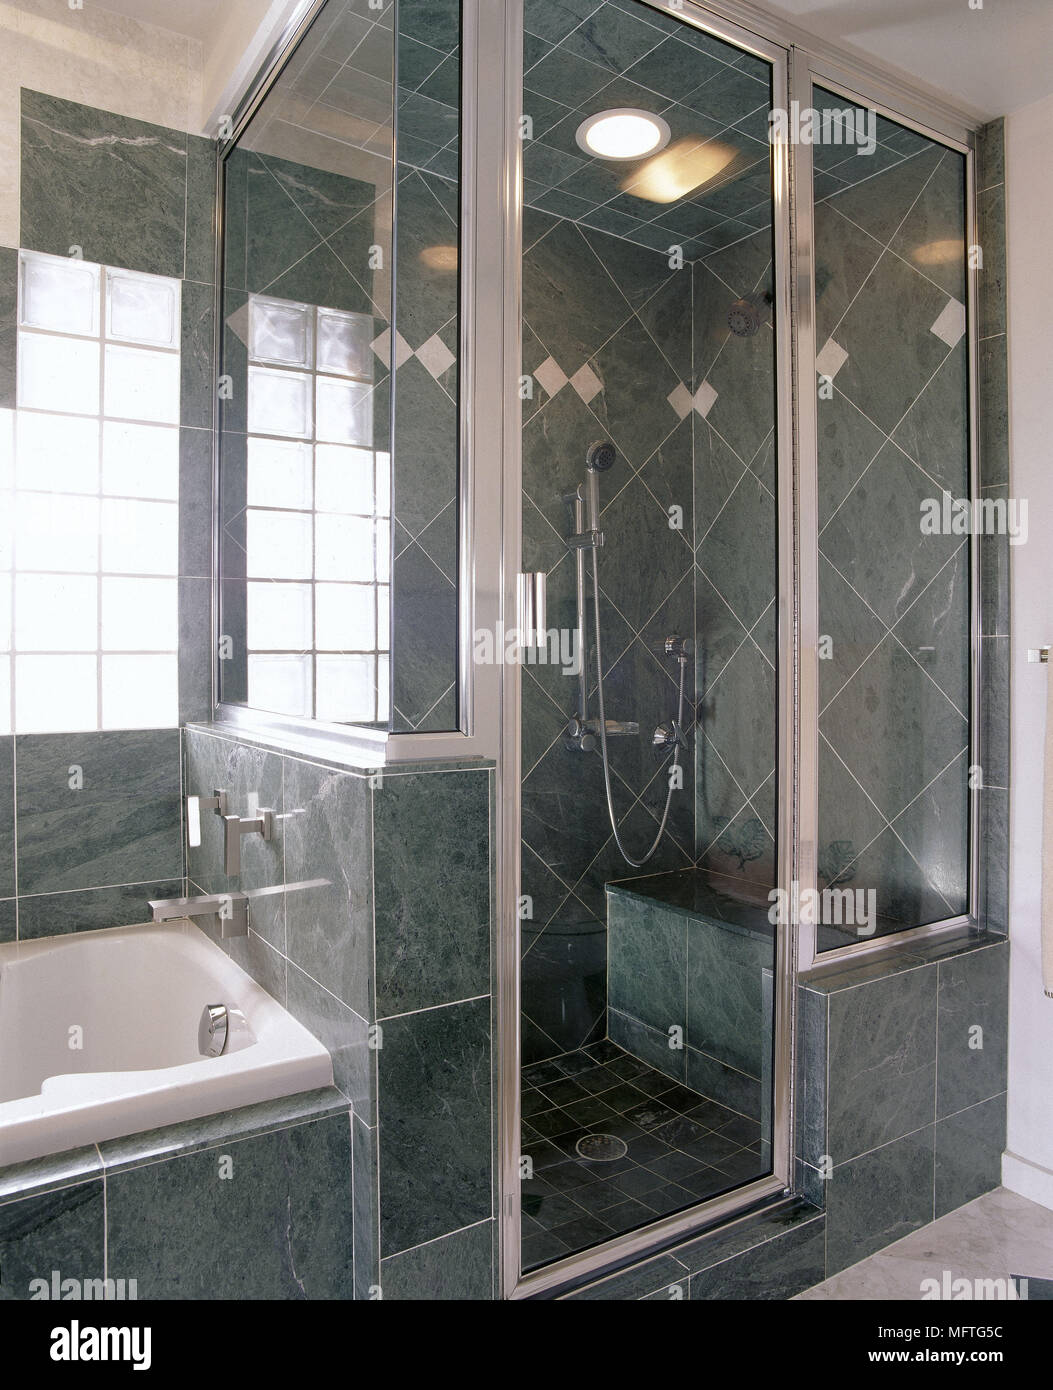 Modern Bathroom Grey Slate Tiled Shower Cubicle Interiors Bathrooms Showers Cubicles Enclosures Tiling Stock Photo Alamy